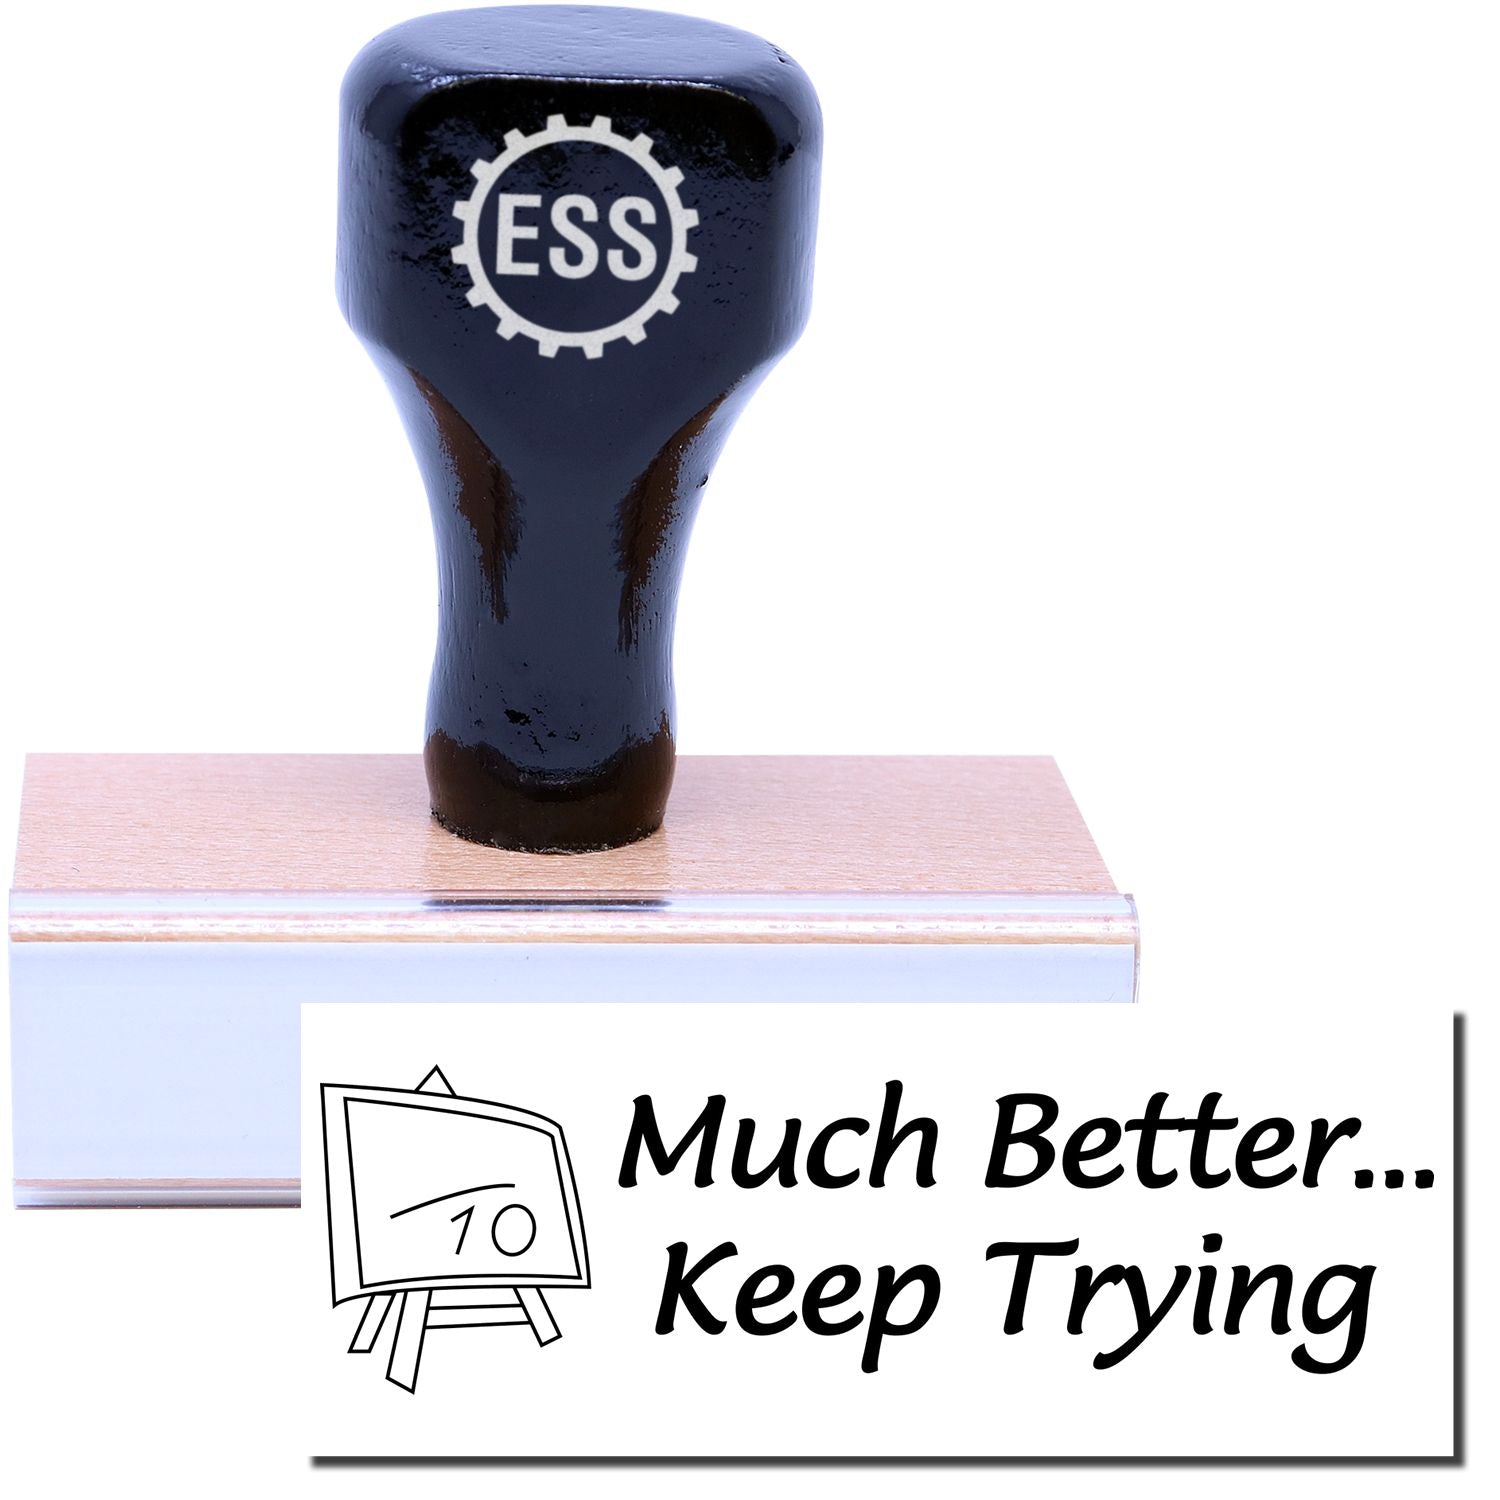 A stock office rubber stamp with a stamped image showing how the text "Much Better... Keep Trying" with a whiteboard showing a number 10 (with a line above it) on the left side is displayed after stamping.